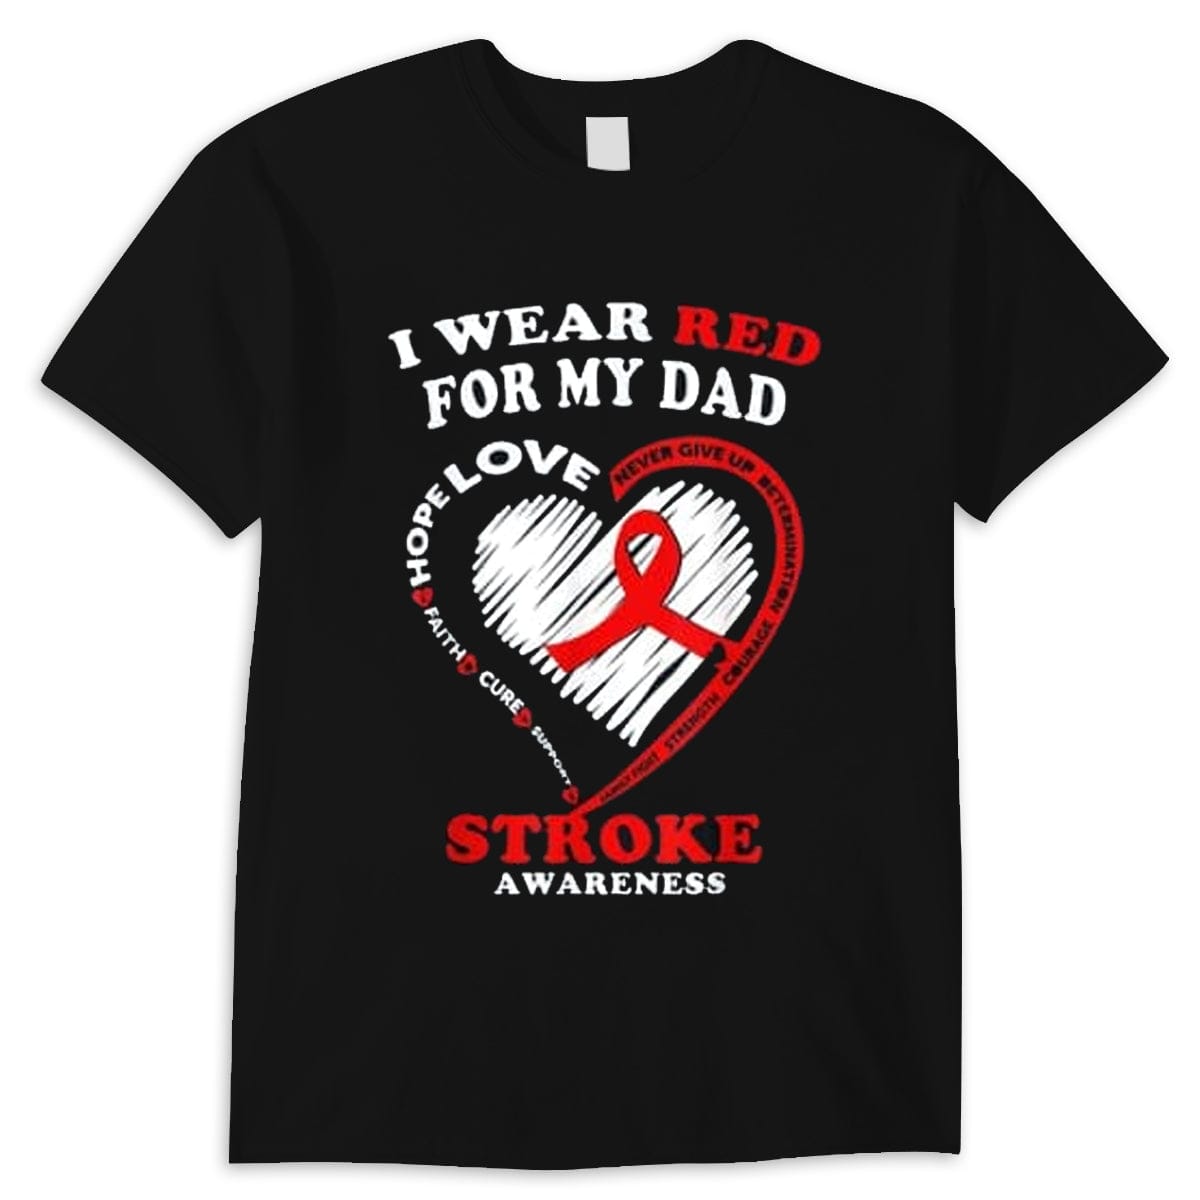 I Wear Red For My Dad Stroke Awareness Shirt